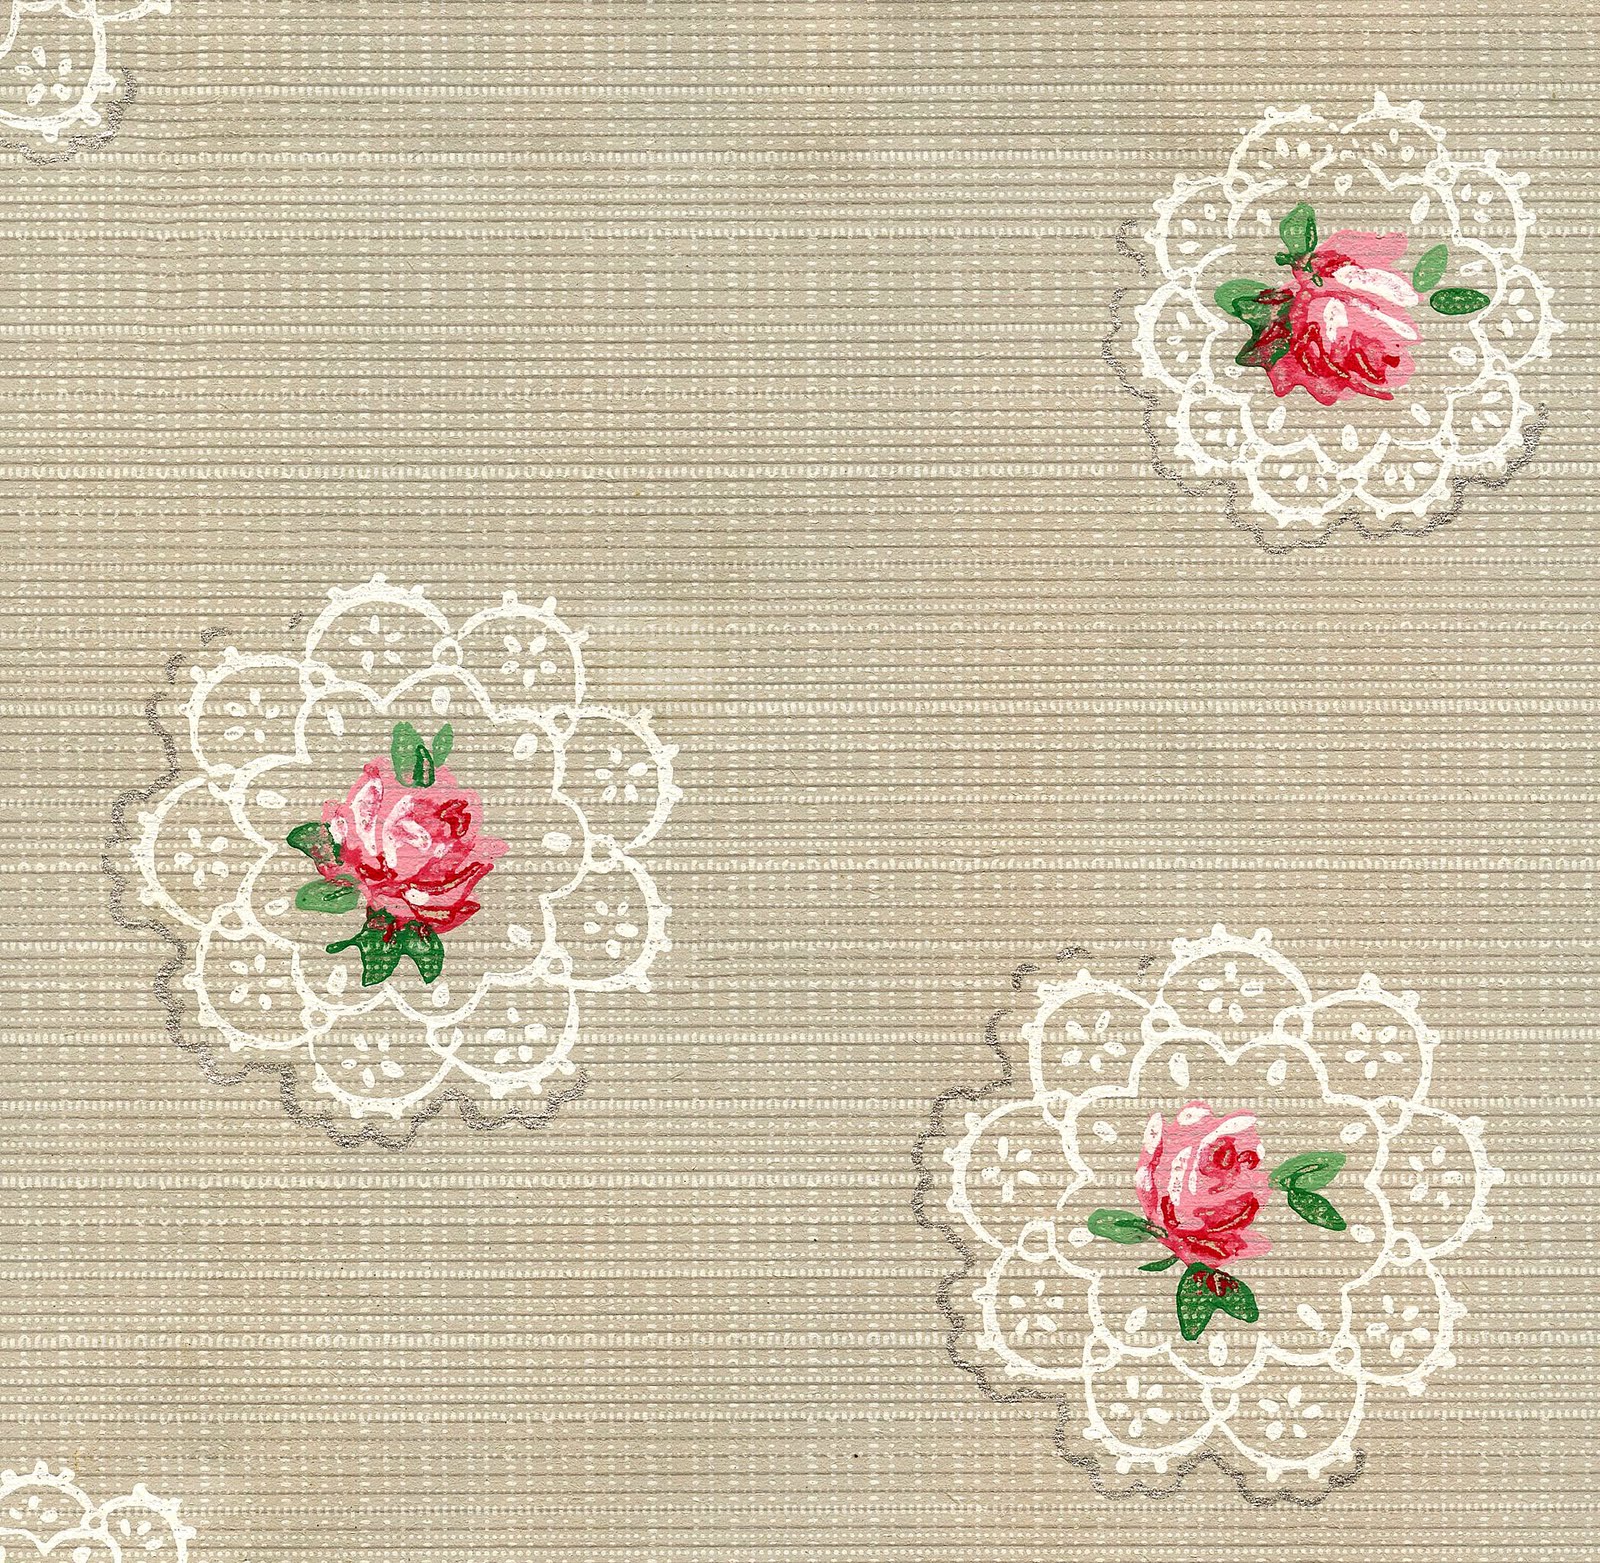 Pretty Vintage Wallpaper Doily Roses The Graphics Fairy